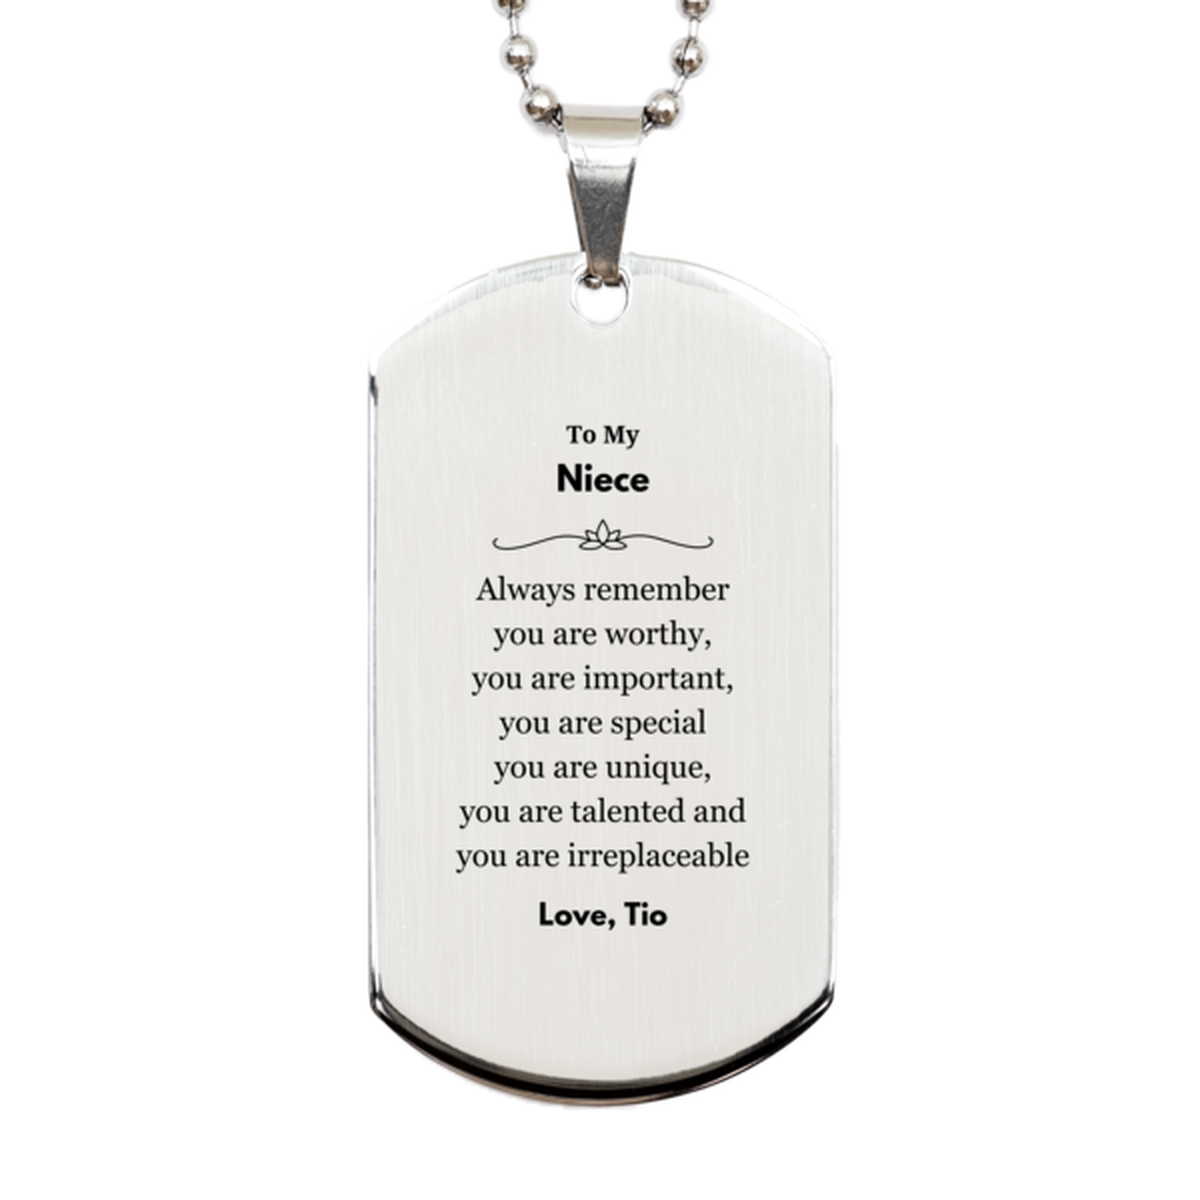 Niece Birthday Gifts from Tio, Inspirational Silver Dog Tag for Niece Christmas Graduation Gifts for Niece Always remember you are worthy, you are important. Love, Tio